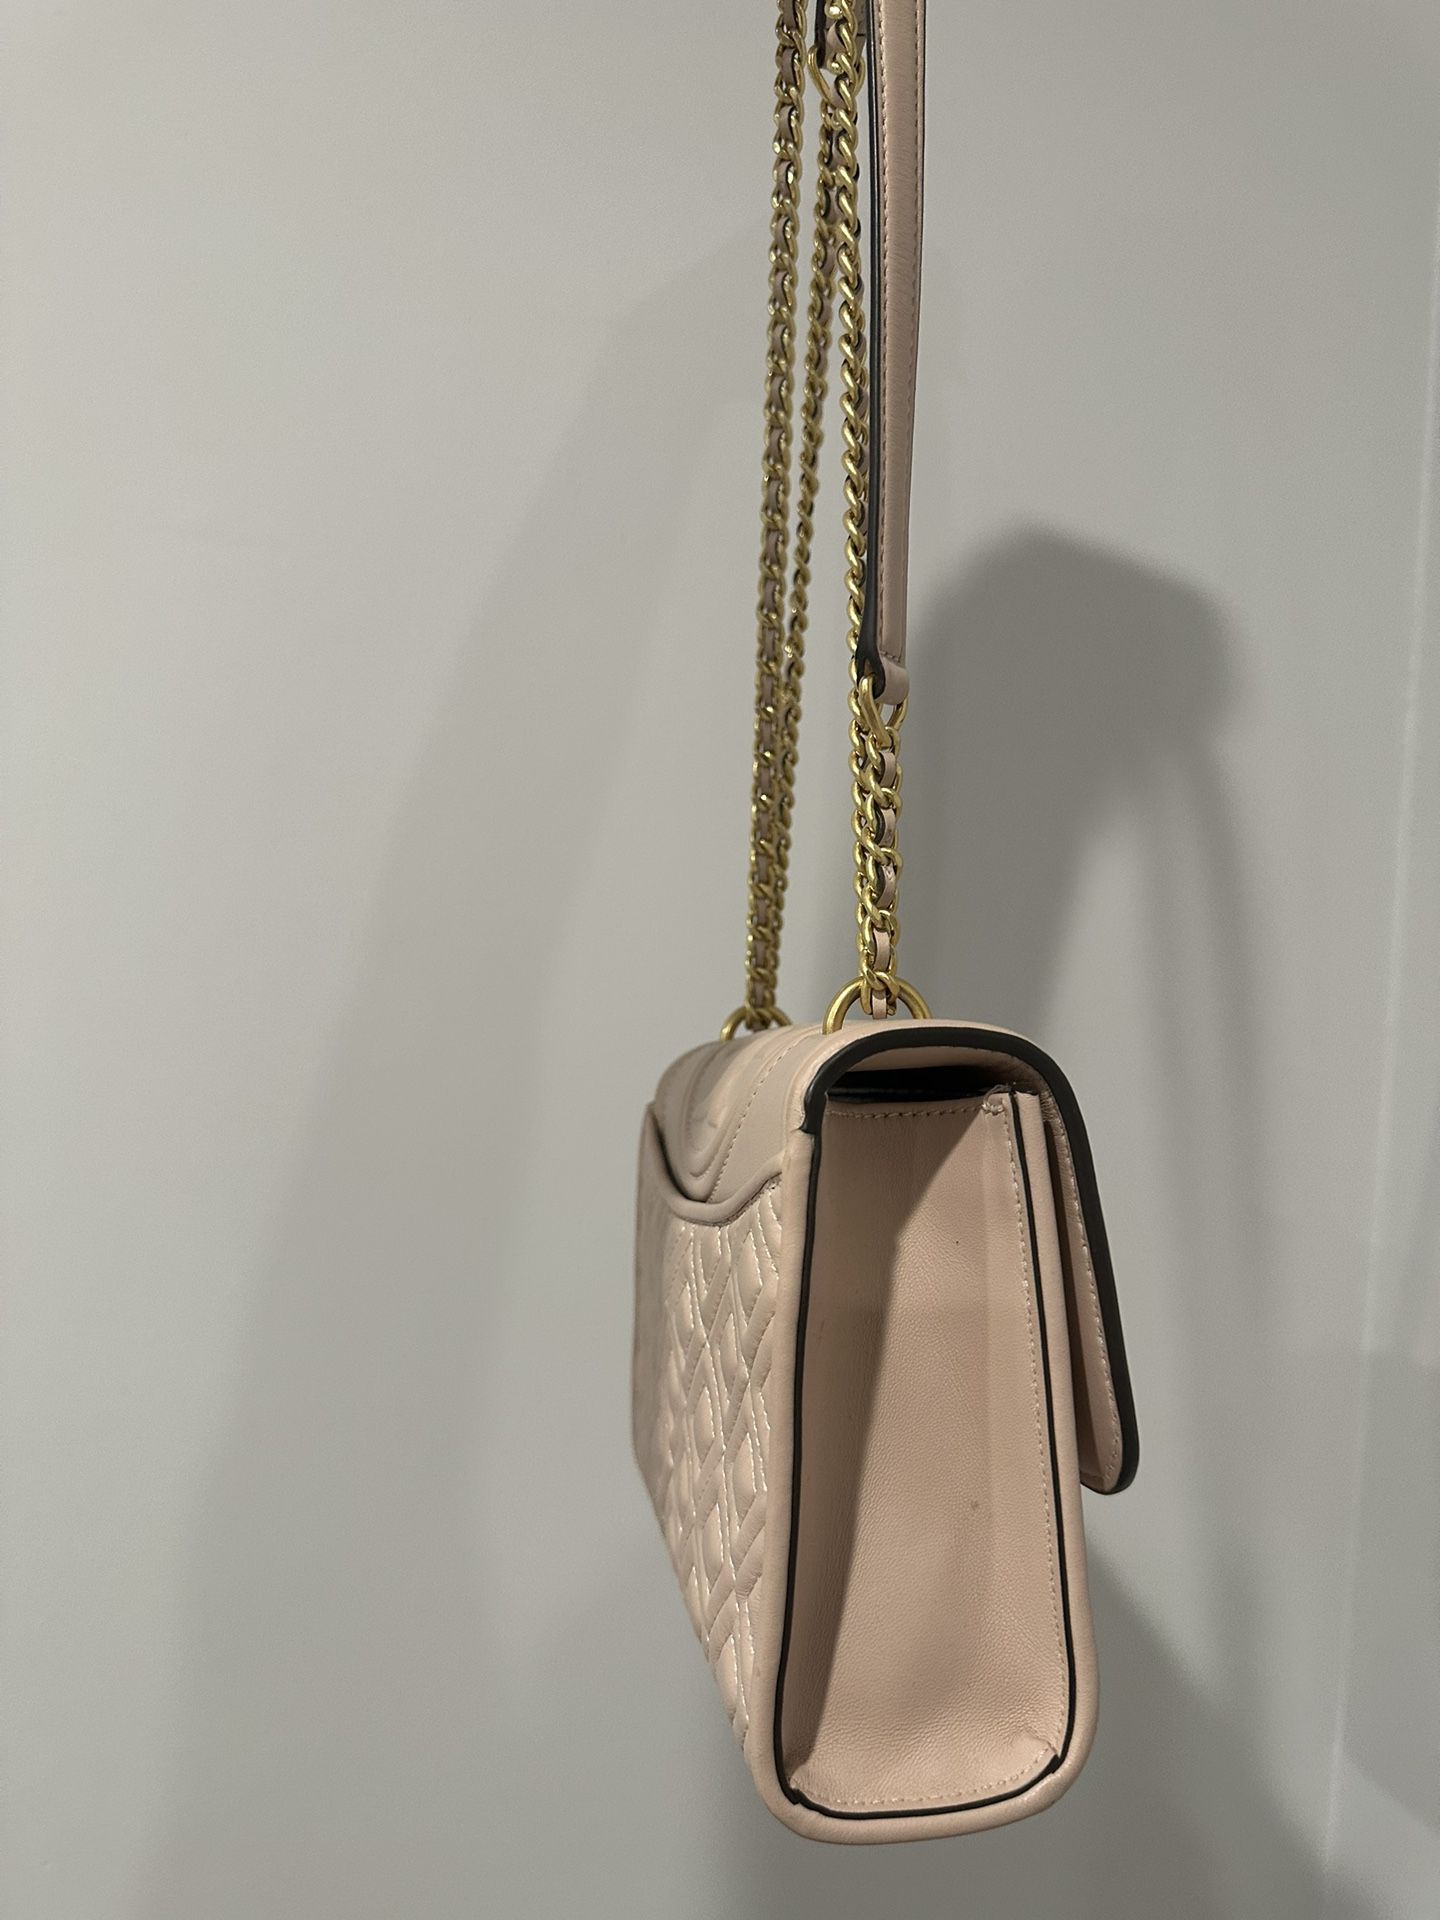 Tory Burch Fleming Small Convertible Shoulder bag for Sale in Burbank, CA -  OfferUp